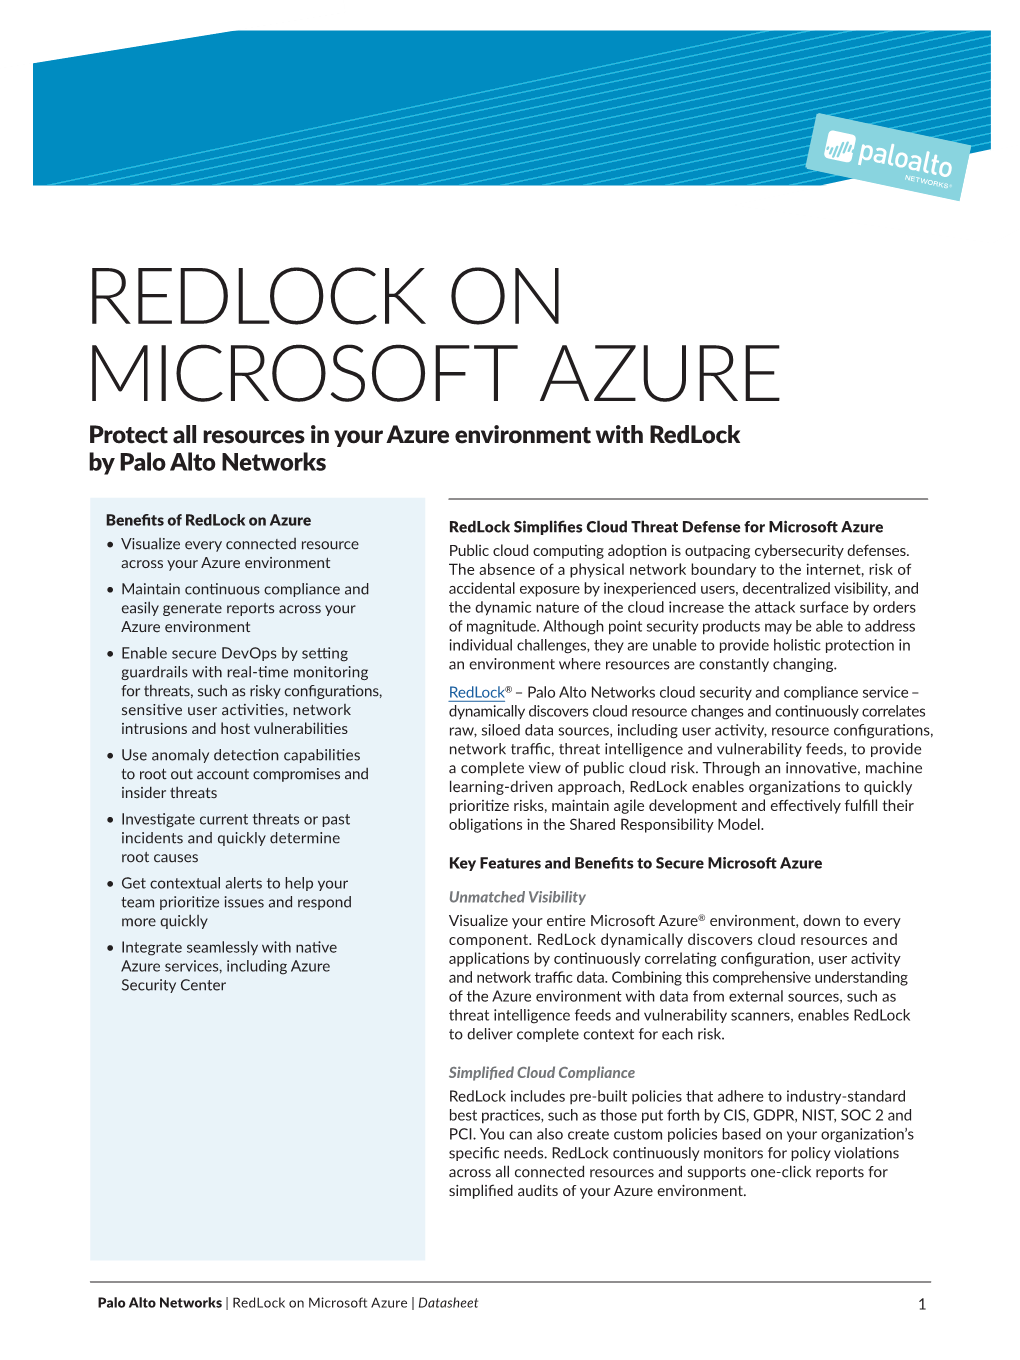 REDLOCK on MICROSOFT AZURE Protect All Resources in Your Azure Environment with Redlock by Palo Alto Networks